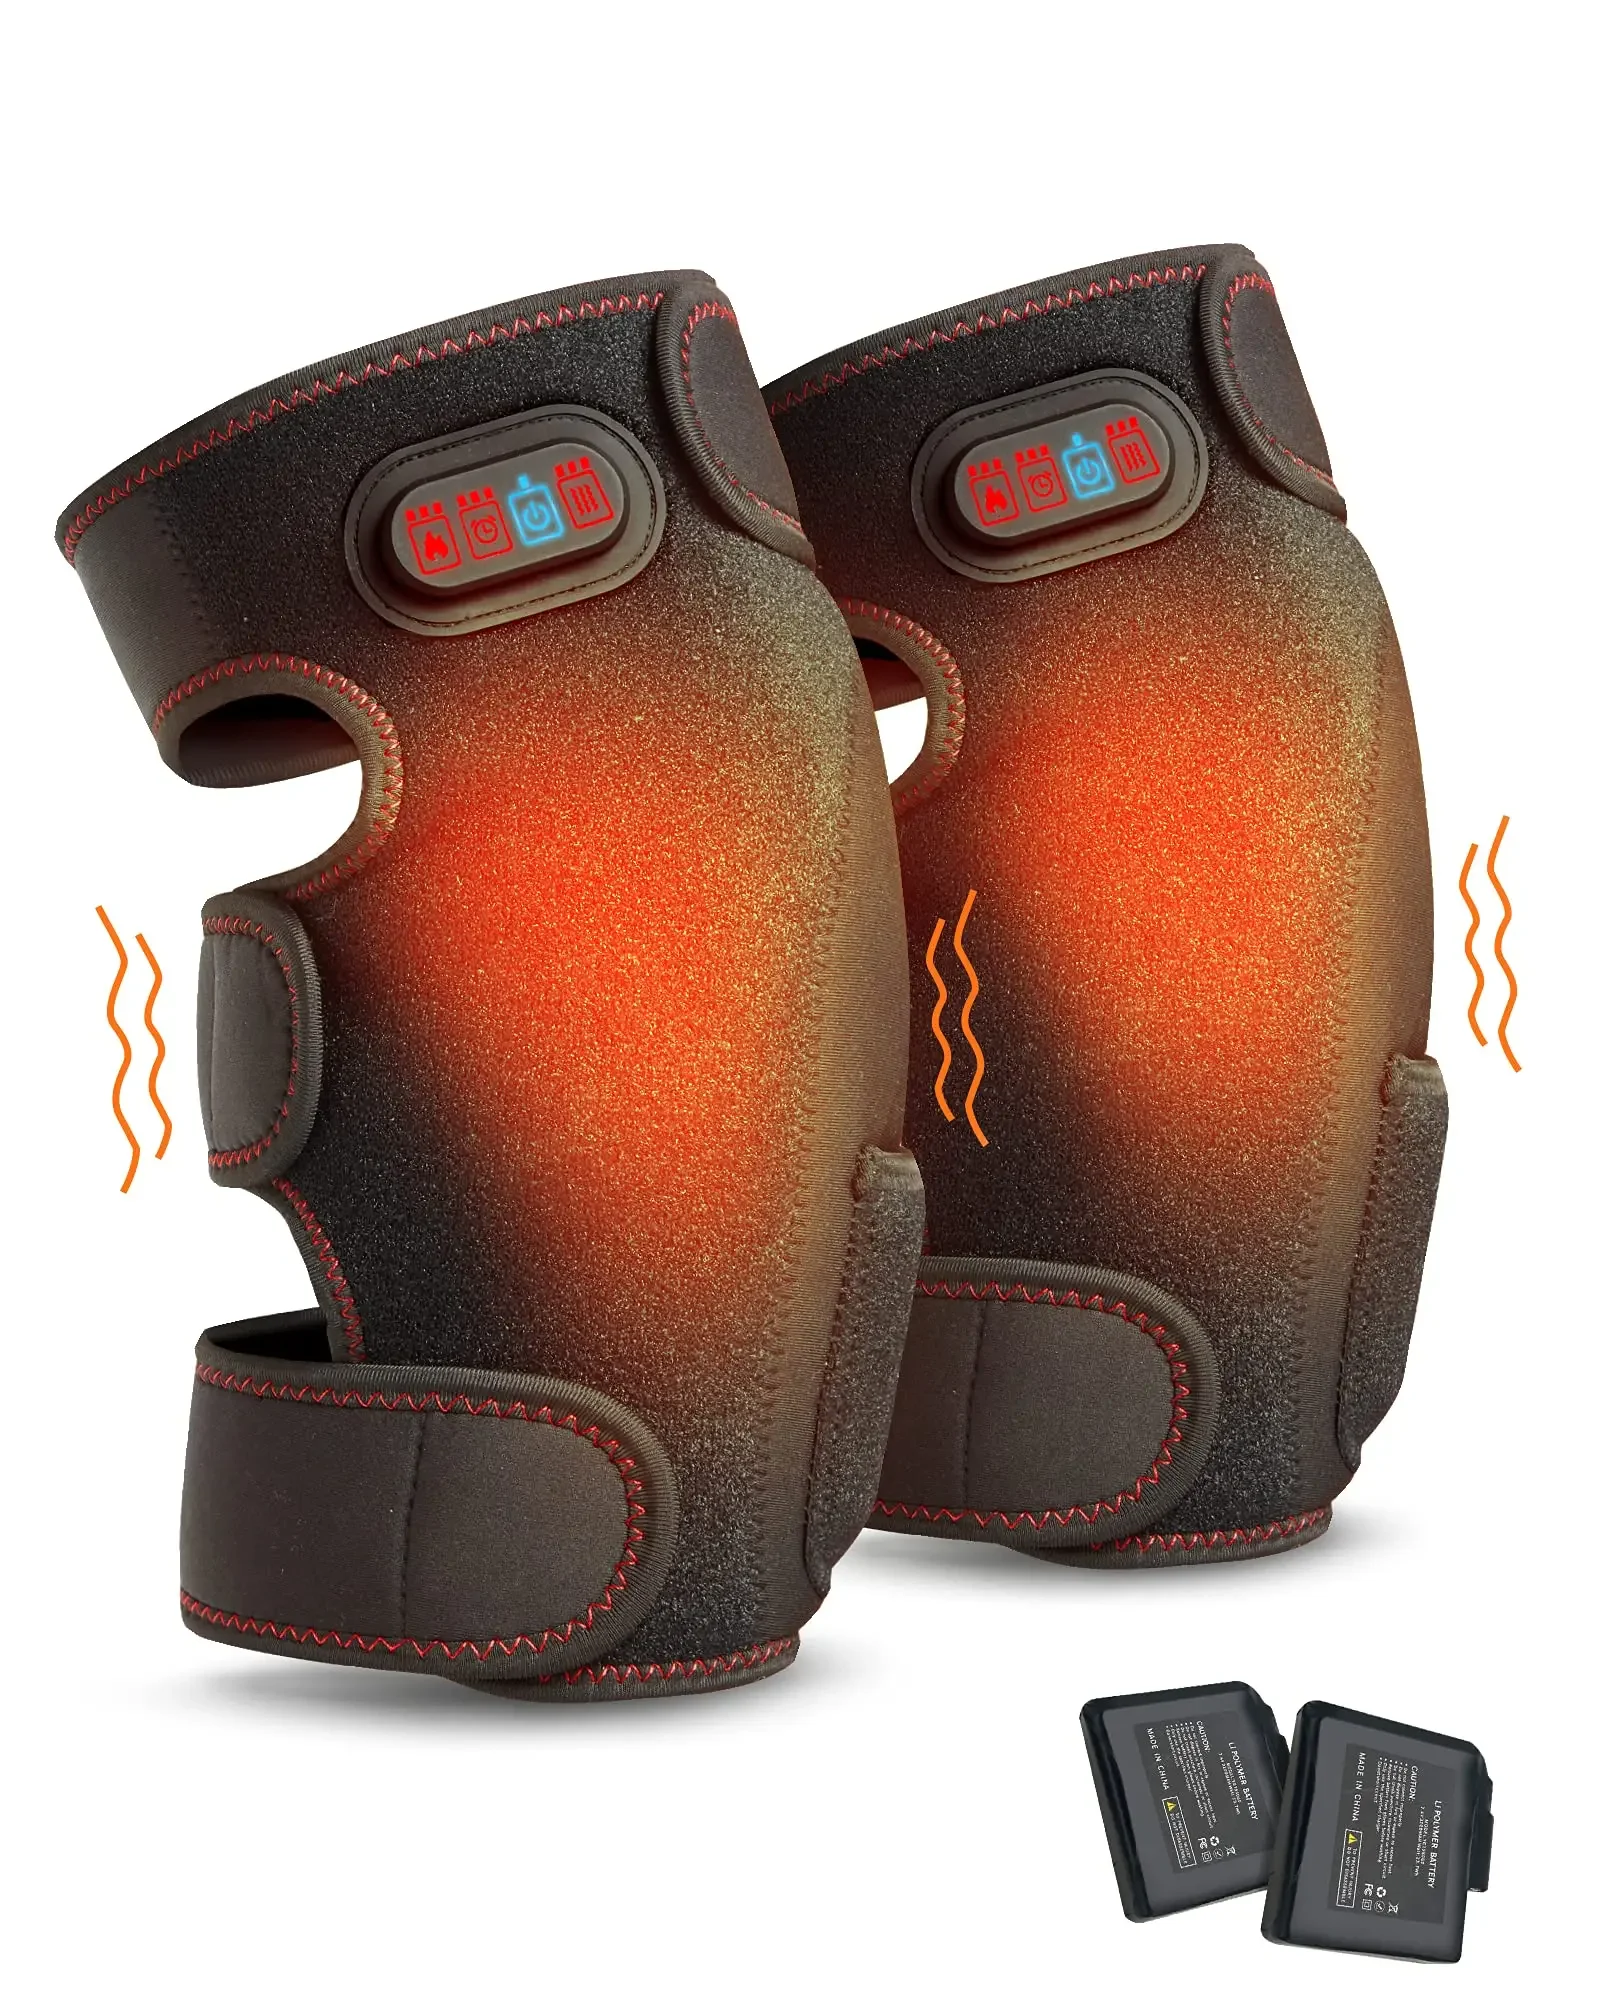 Heated Knee Brace Wrap - Battery Powered Knee Heating Pad Vibration Massager for Knee Pain Relief (1 Pair) wireless electric foot ankle massager multi level settings vibration heating massage pain relief and comfort massage therapy